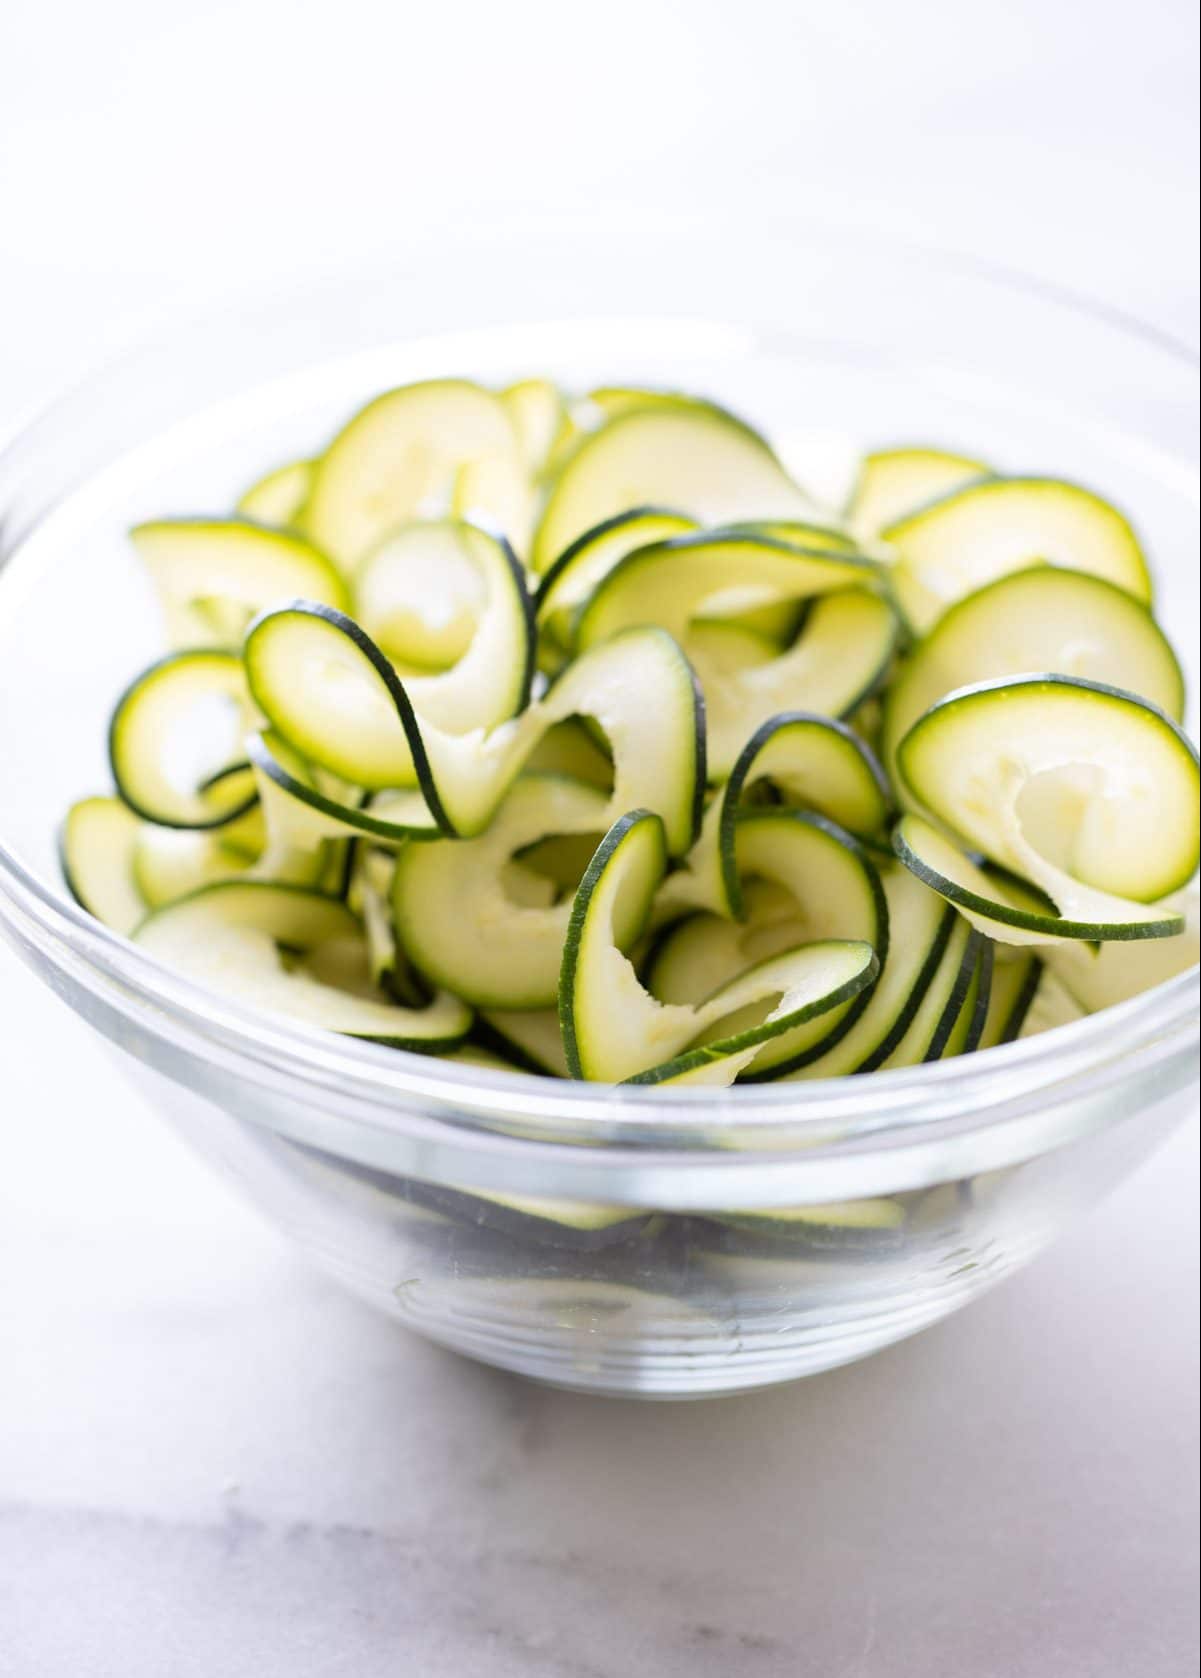 zucchini noodles in clear glass bowl